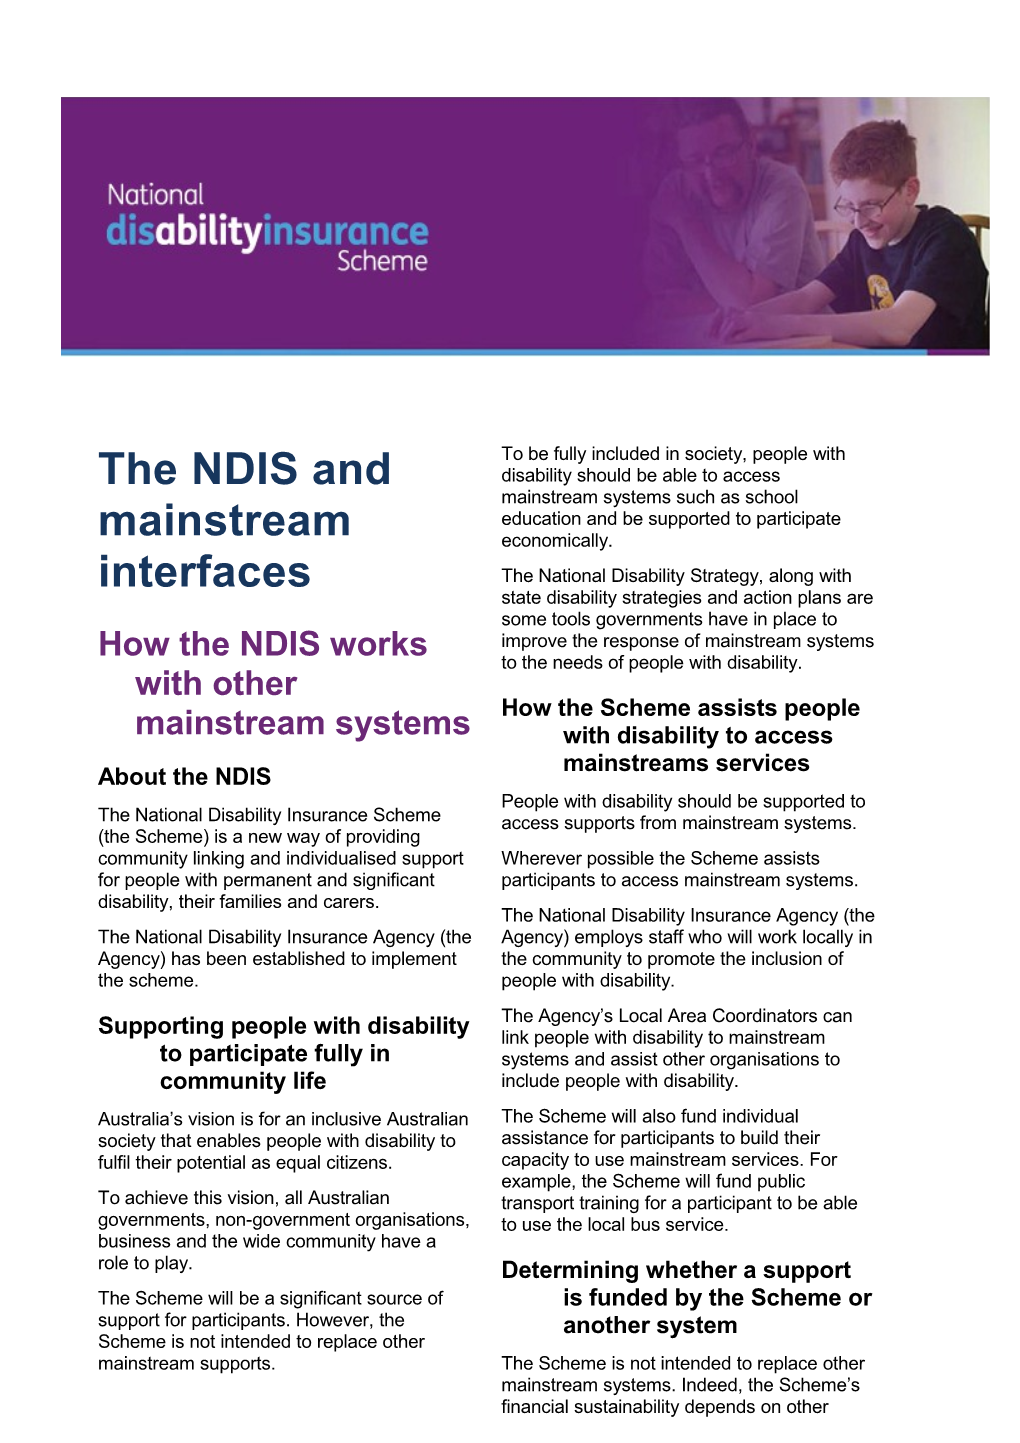 The NDIS and Mainstream Interfaces